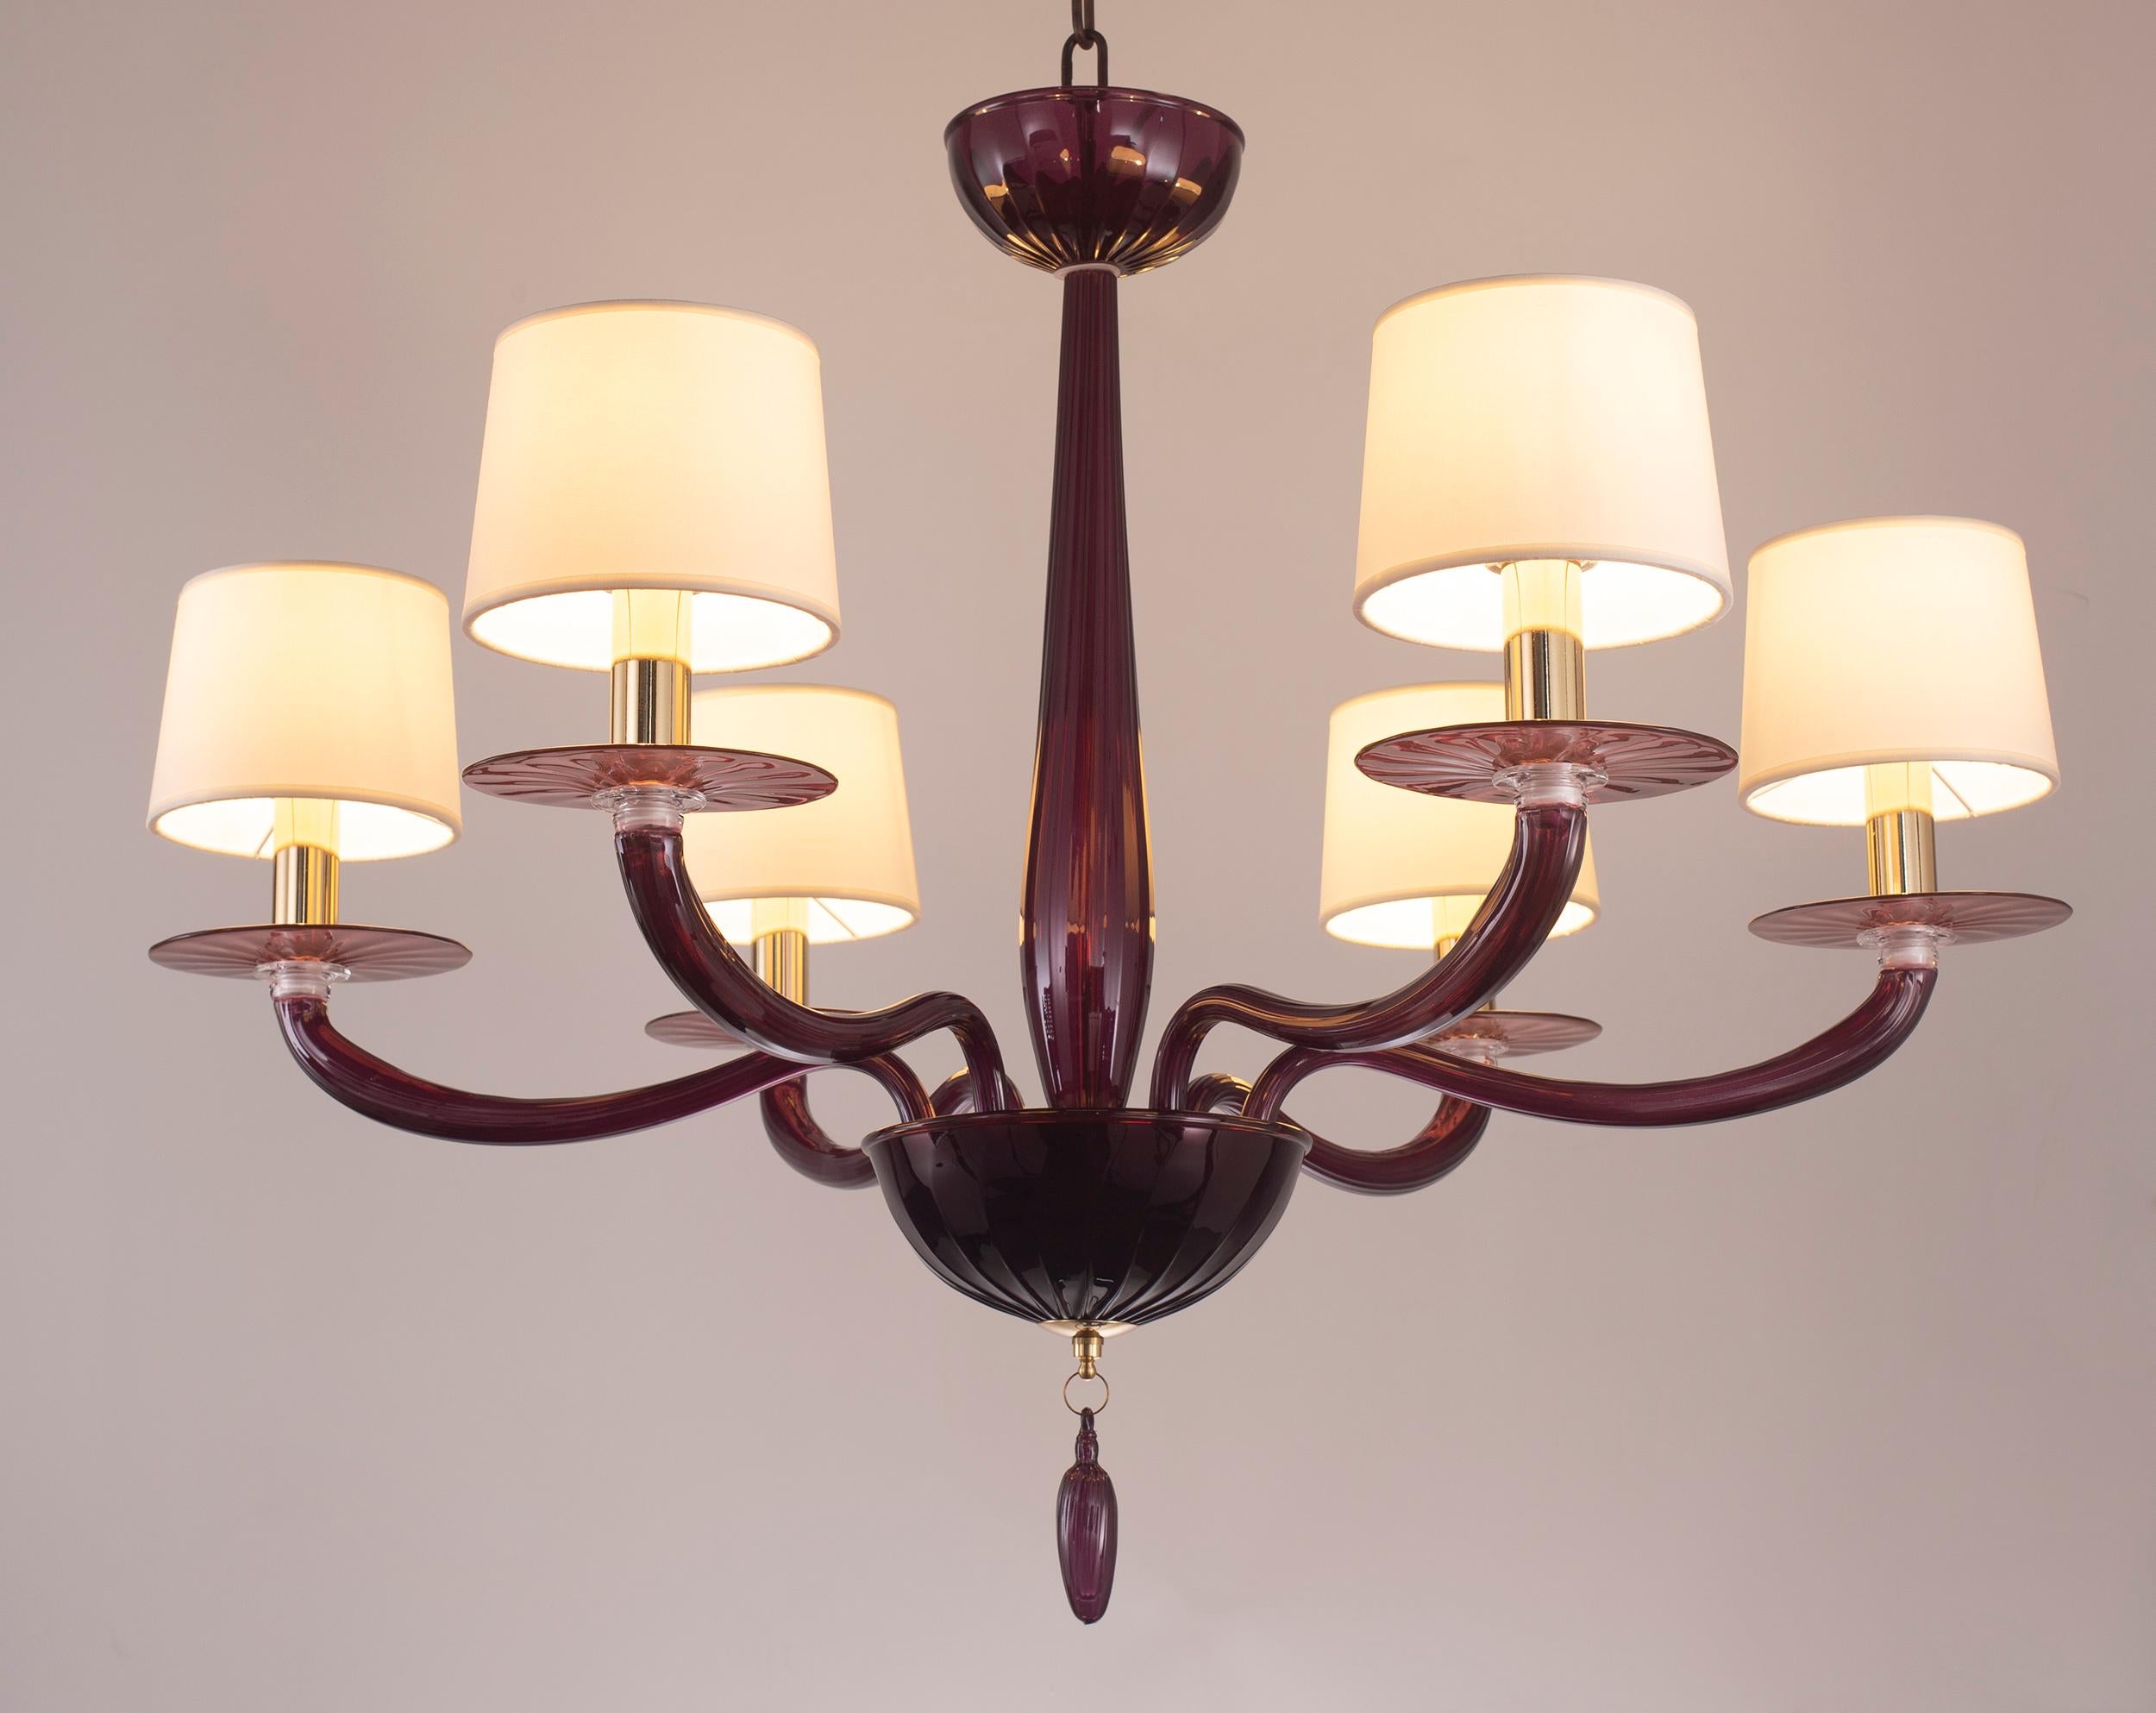 Serenade chandelier 6 Lights Aubergine Murano glass, white handmade cotton lampshades by Multiforme
Serenade collection is inspired by a contemporary and international design, simple but not banal, and consists of elements studied in minute detail.